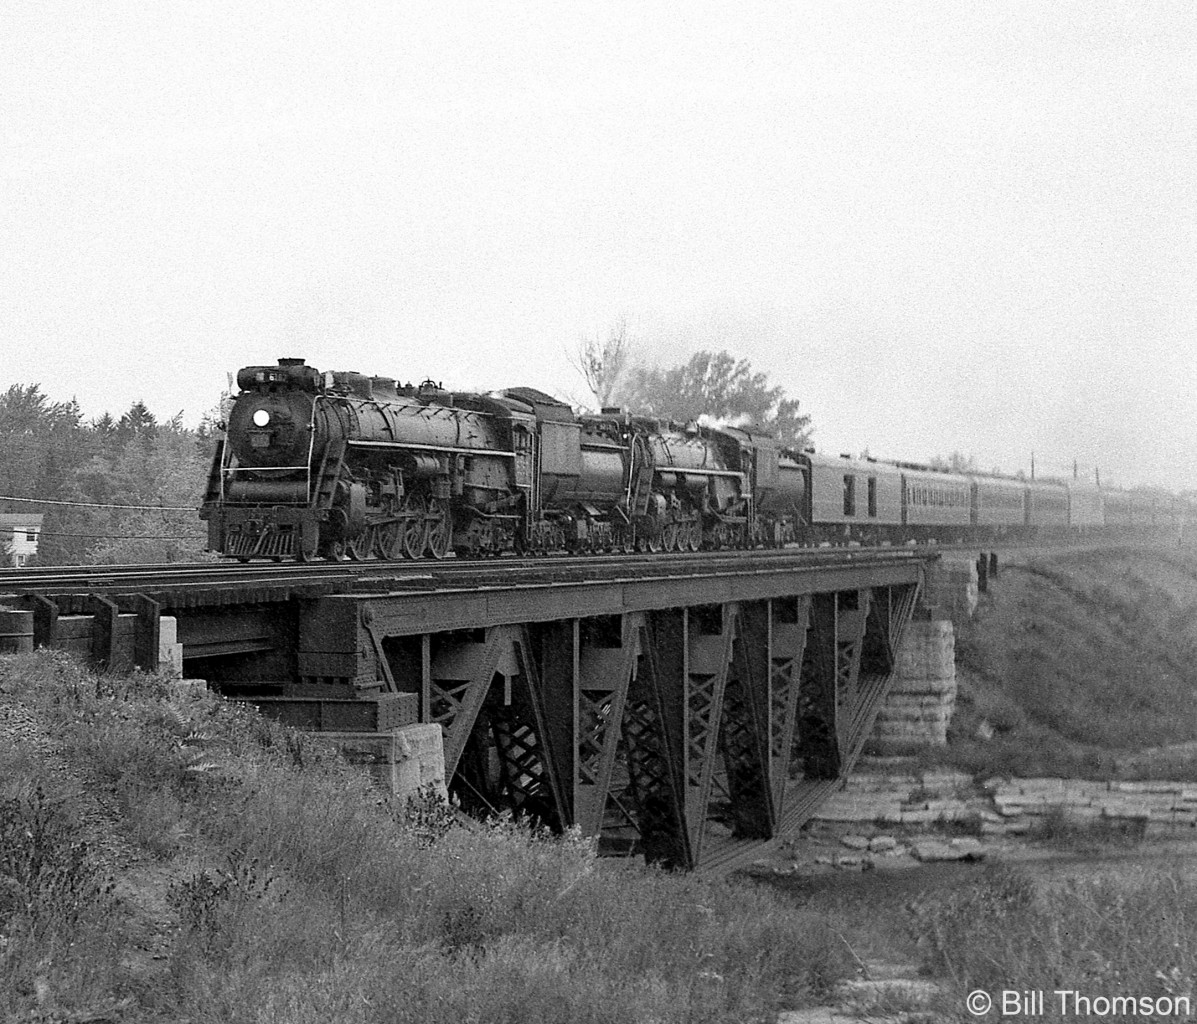 A Canadian National steam excursion train doubleheaded by CN Northerns 6167 and 6218 heads westbound on the Oakville Sub, crossing the Credit River bridge in Port Credit, enroute to Paris Junction on September 27th 1964.